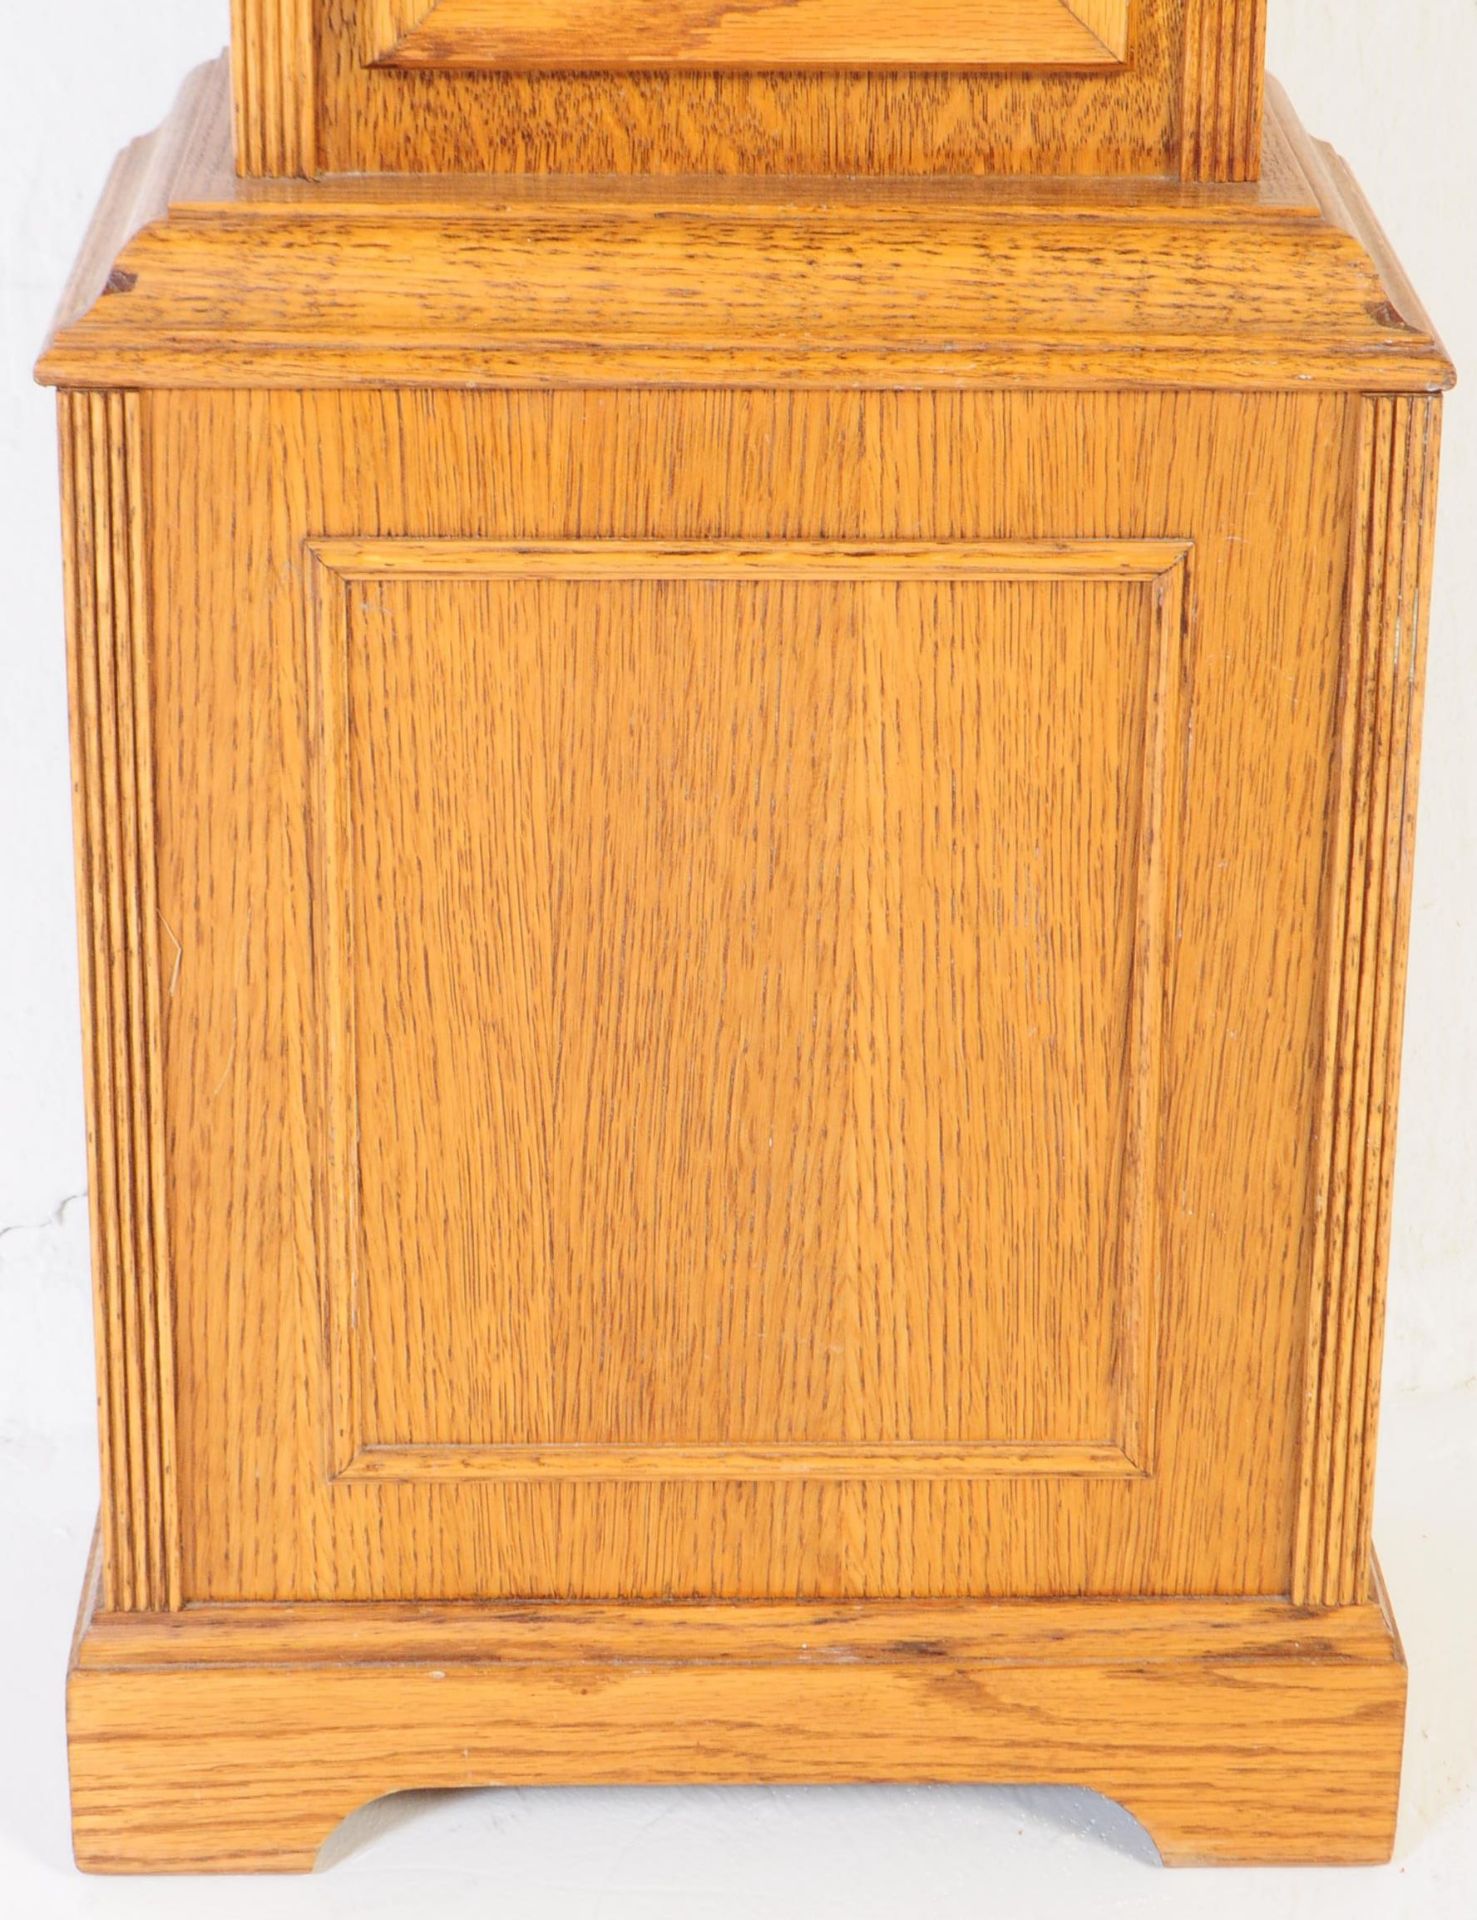 EARLY 20TH CENTURY ARTS & CRAFTS OAK GRANDMOTHER CLOCK - Image 7 of 9